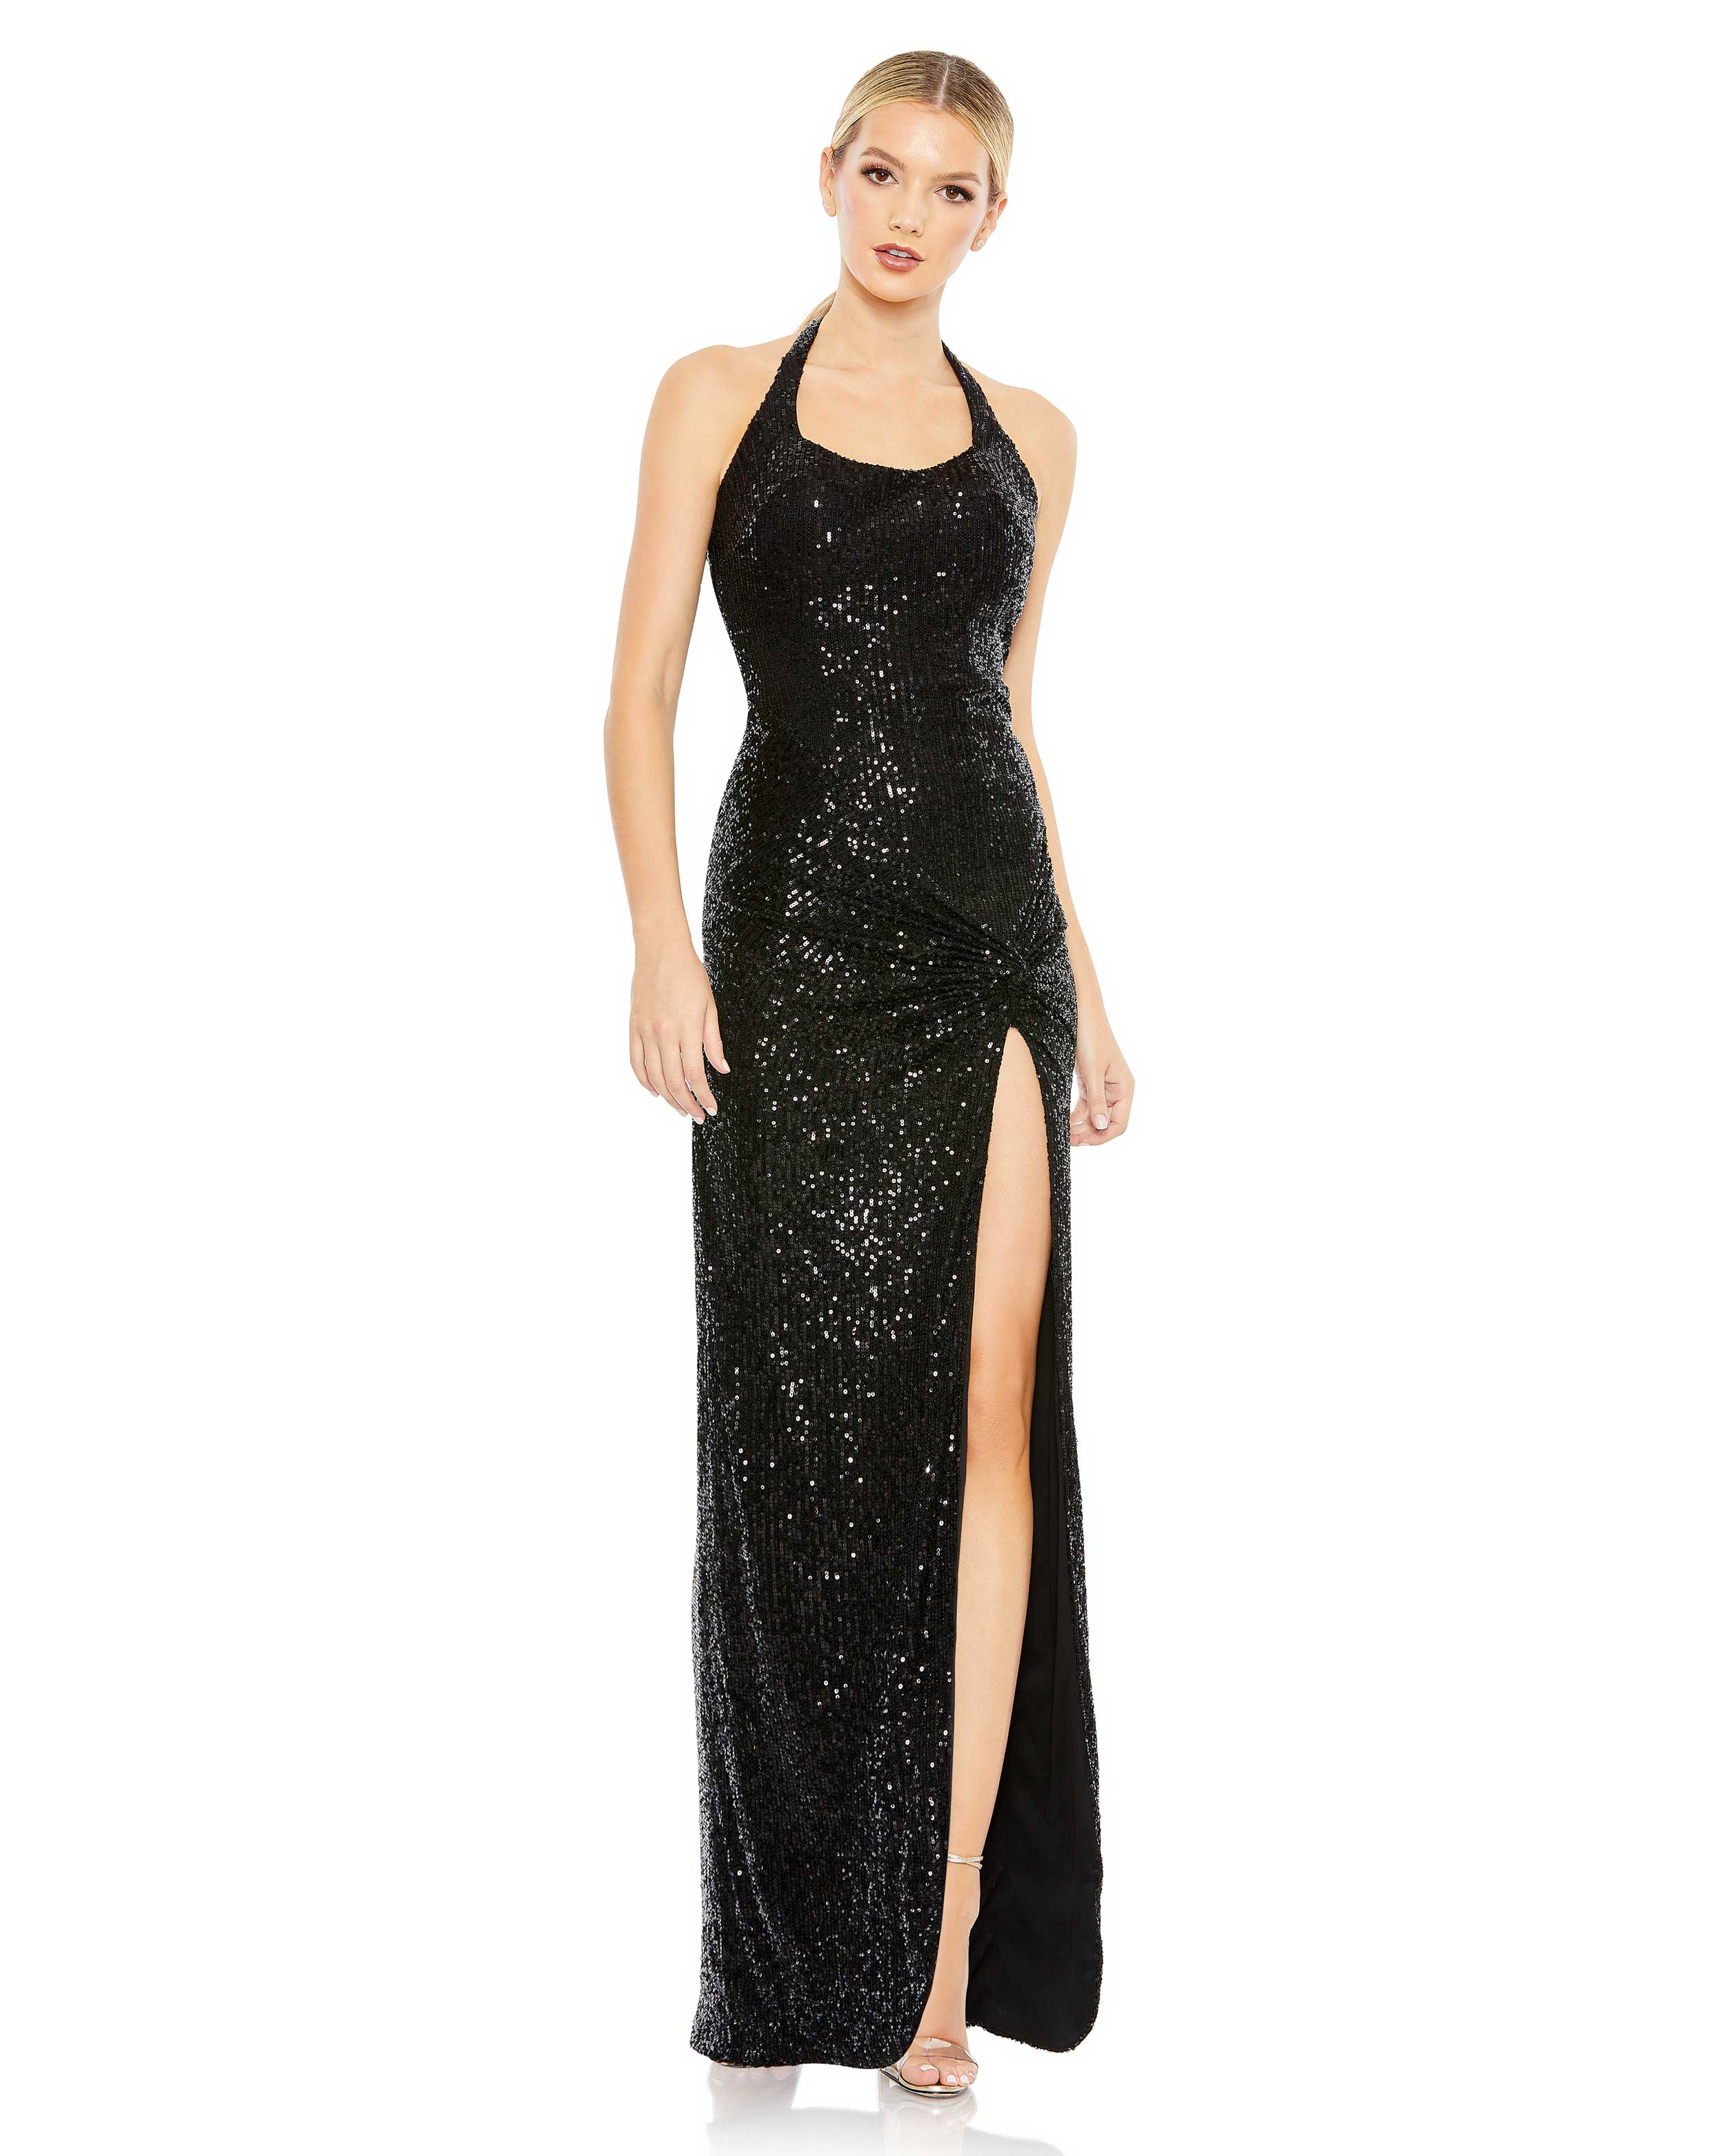 Sequined Halter Strap Low Side Knot Gown